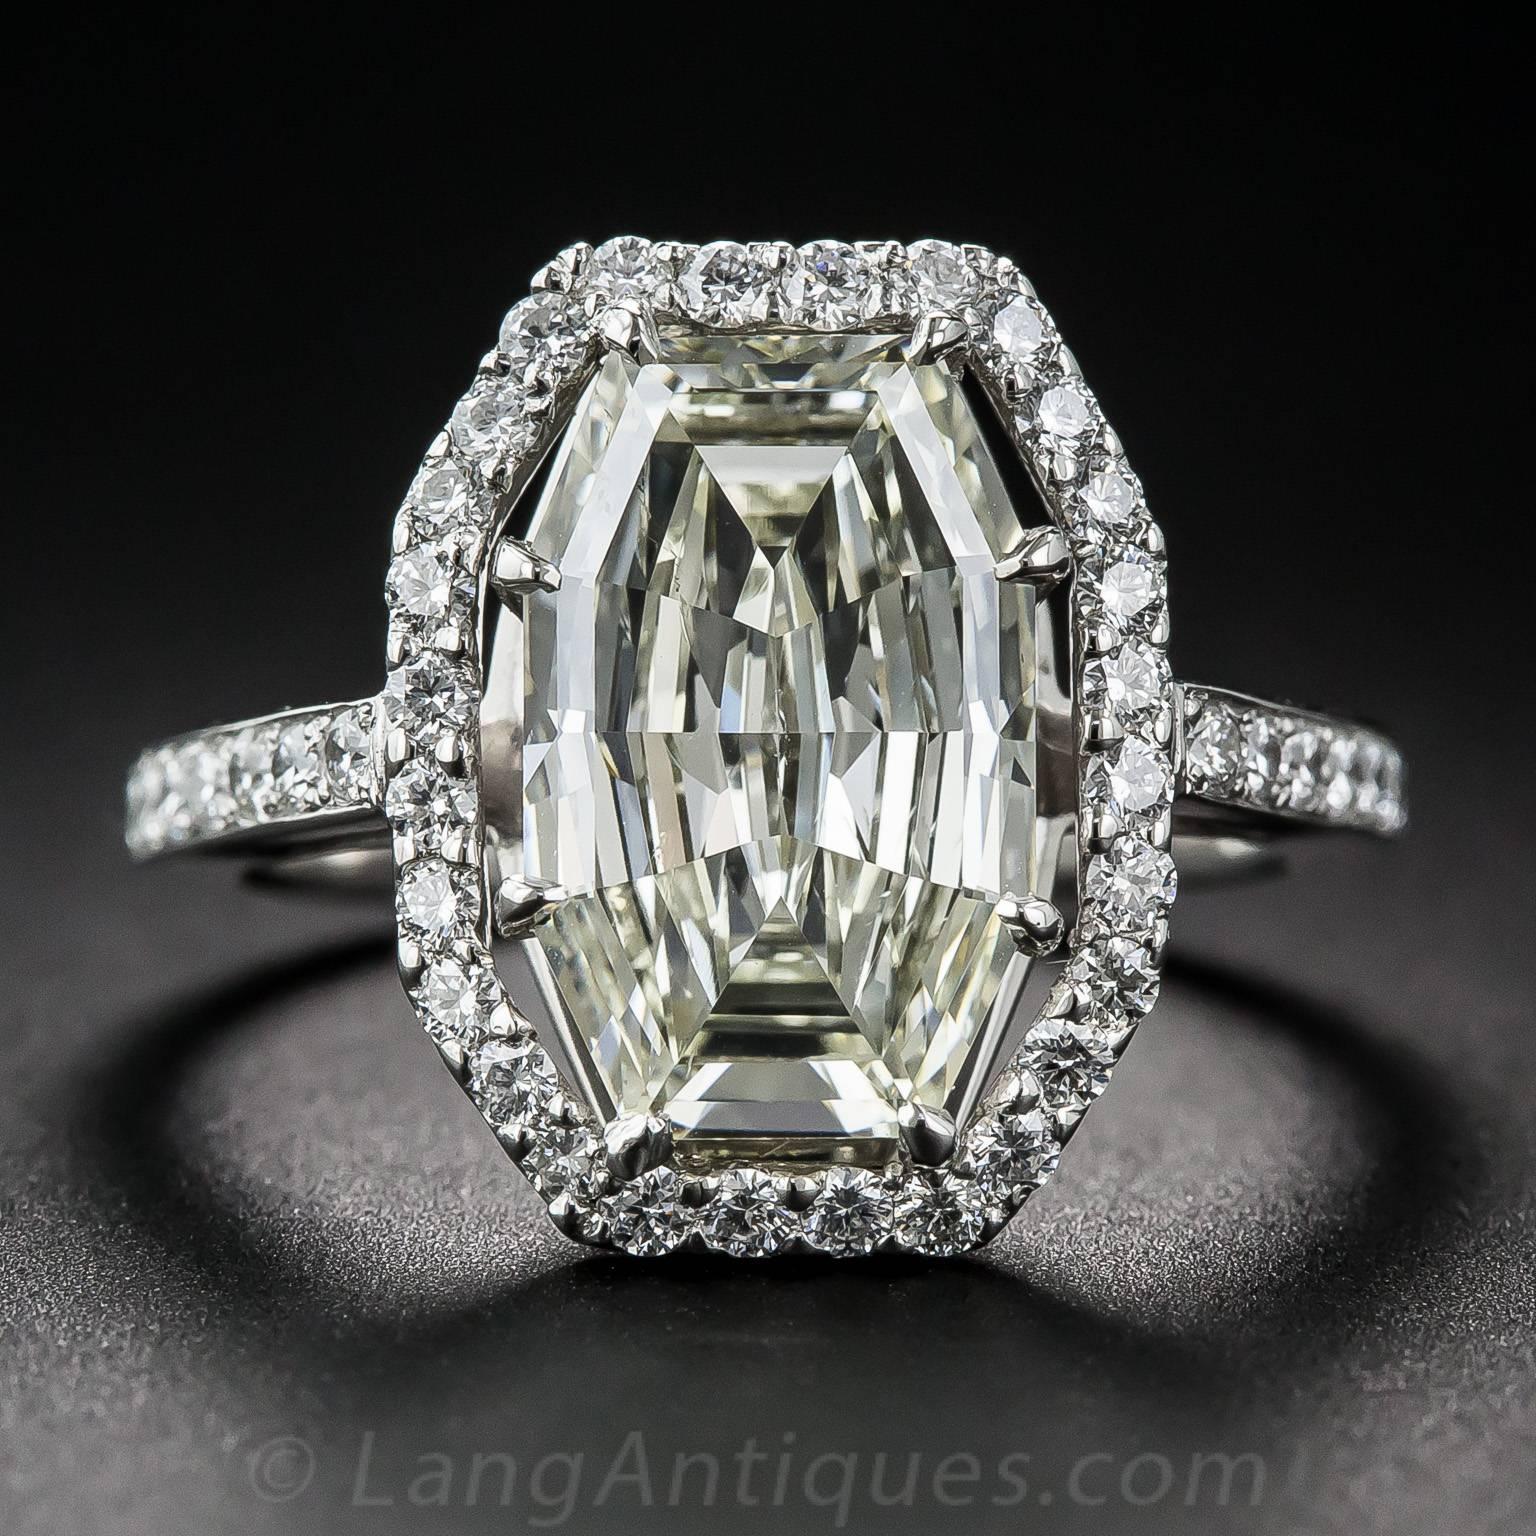 This unusual, if not unique, elongated octagonal shaped diamond, weighing 3.28 carats (but presenting significantly larger due to its masterful cut), reflects and returns light from every angle. This impressive ultra-sparkler is presented in